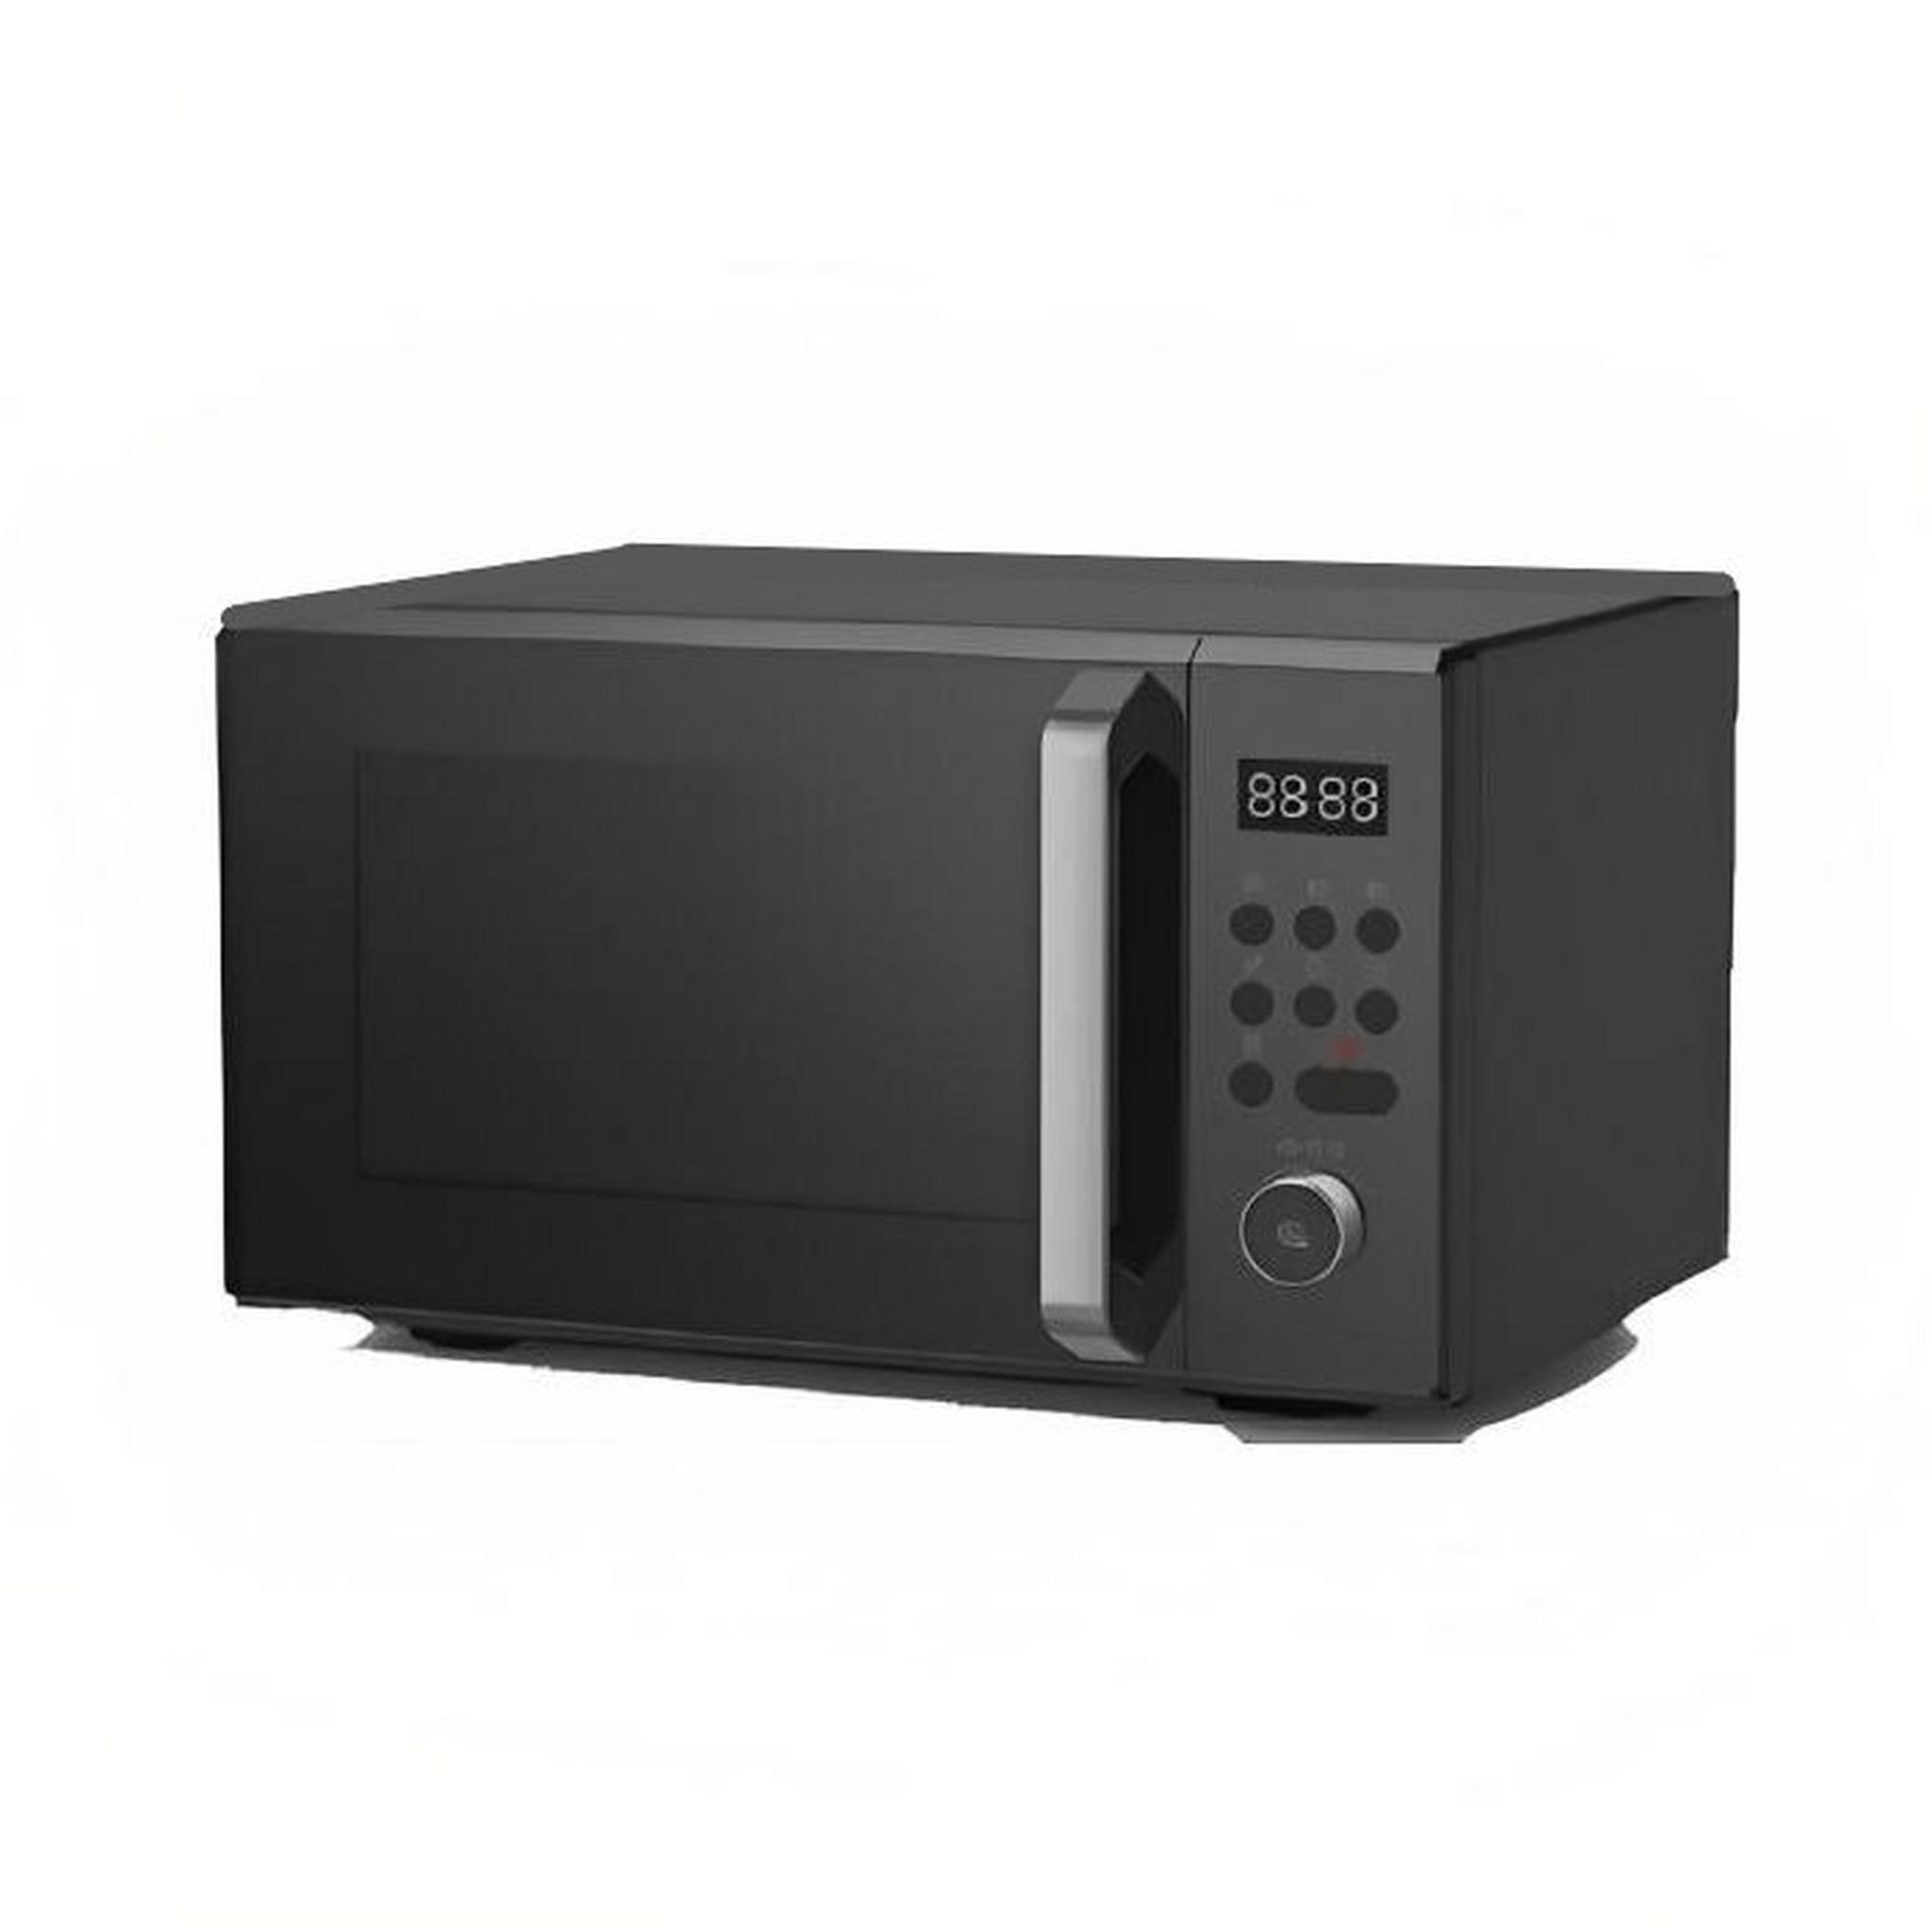 Wansa Microwave Oven, 31L, AG0P042UP – Black